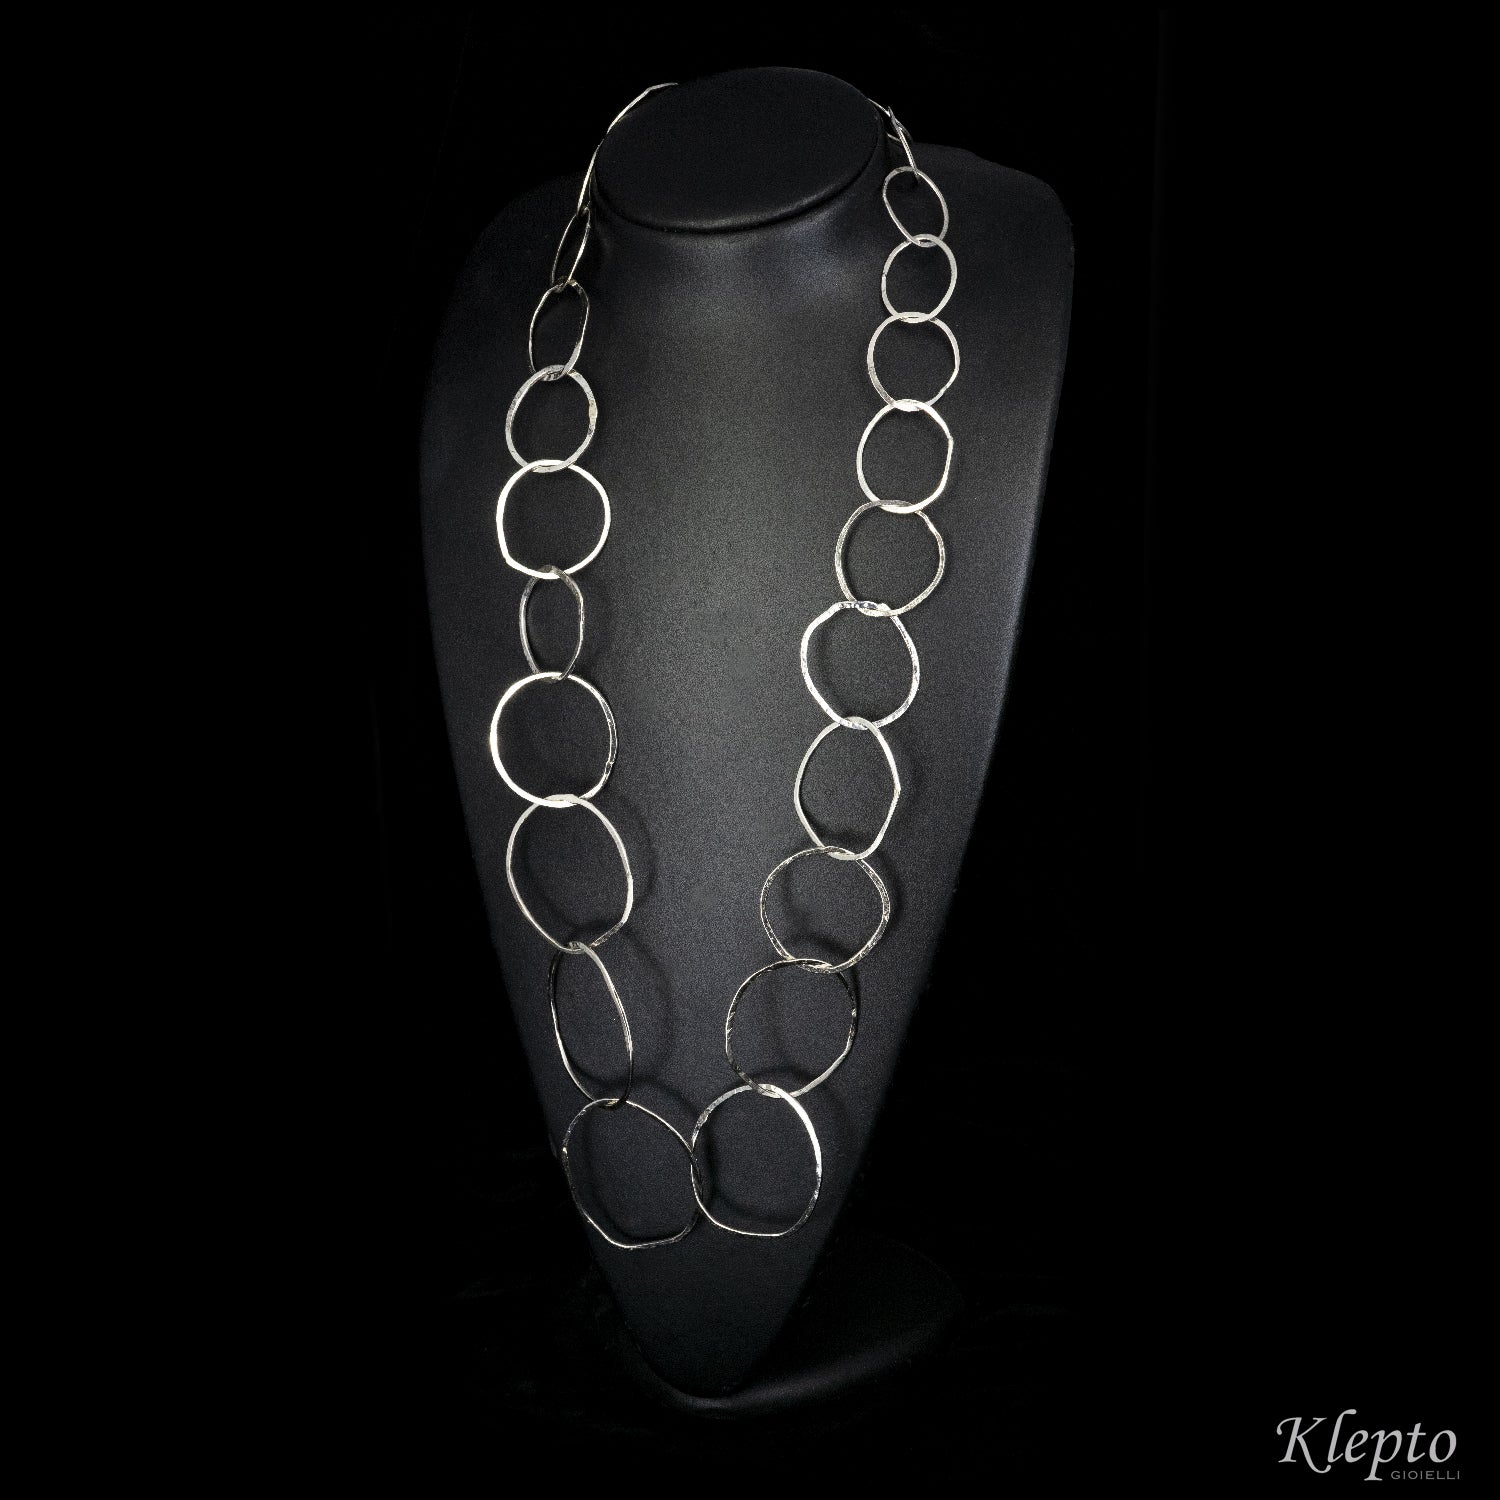 Necklace in Silnova® Silver with hand-hammered oval rings